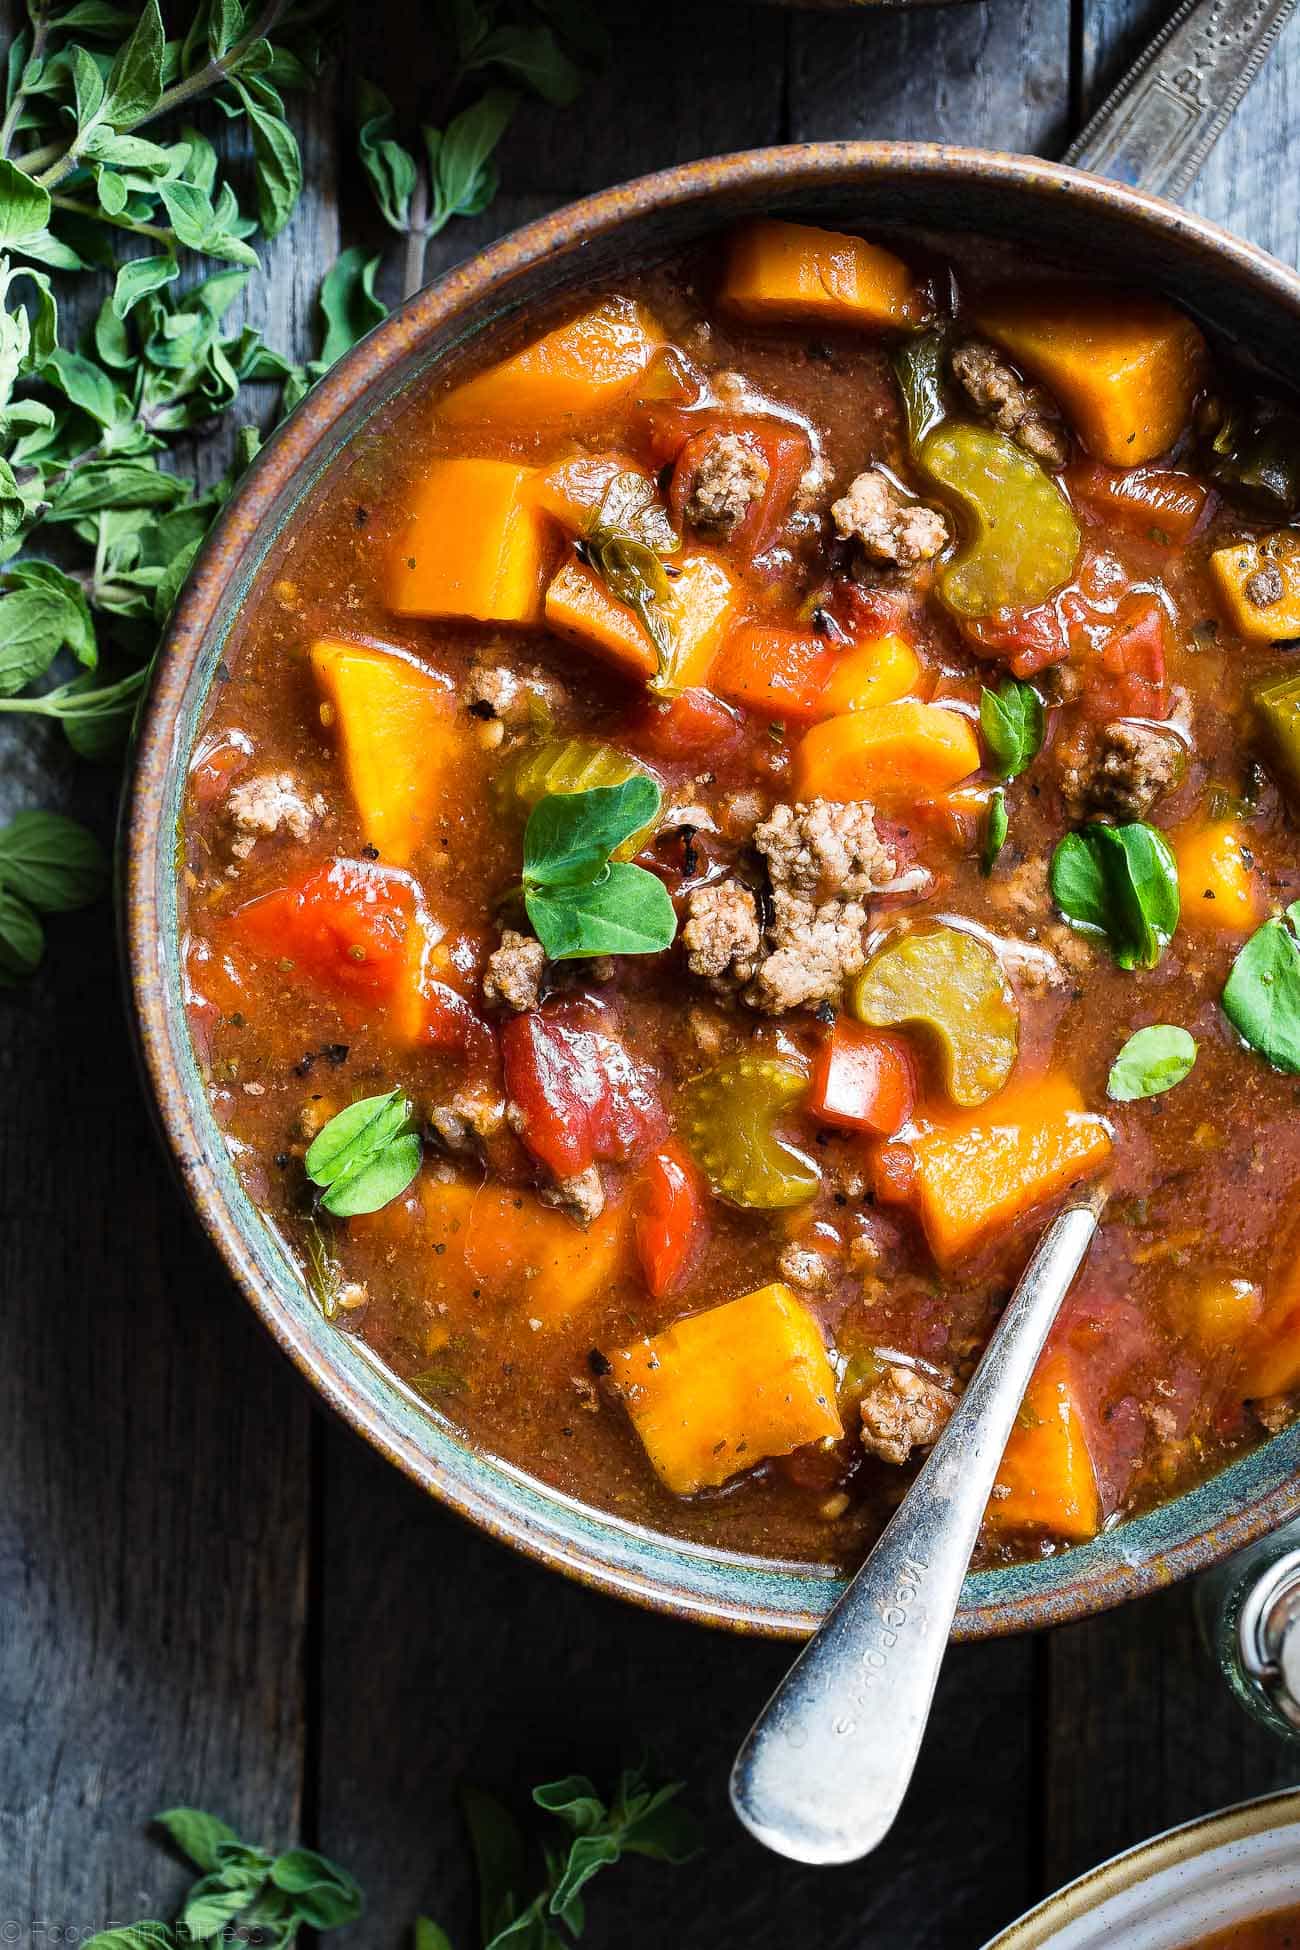 Paleo Slow Cooker Hamburger Soup -  This easy, healthy hamburger soup is made in the slow cooker and is a grain/dairy/sugar/gluten free and whole30 dinner that the whole family will love! Makes great leftovers too!  | Foodfaithfitness.com | @FoodFaithFit